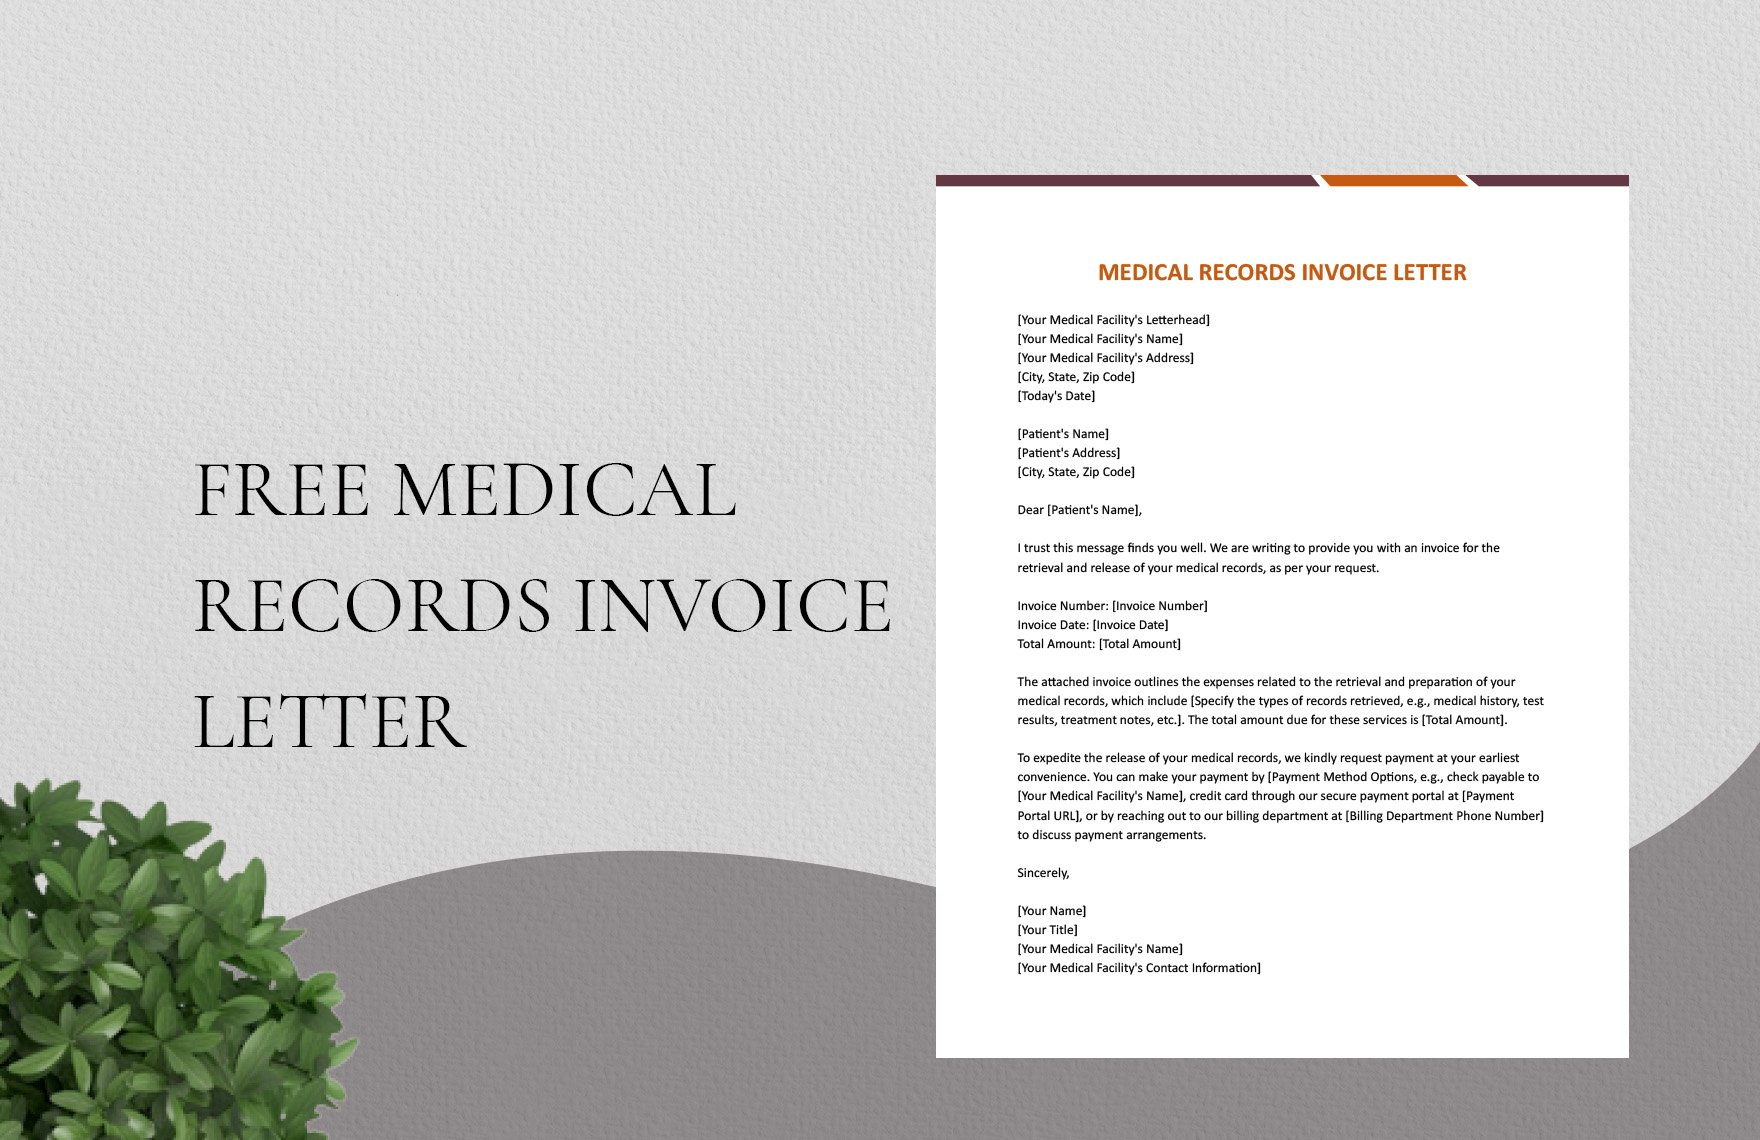 Medical Records Invoice Letter